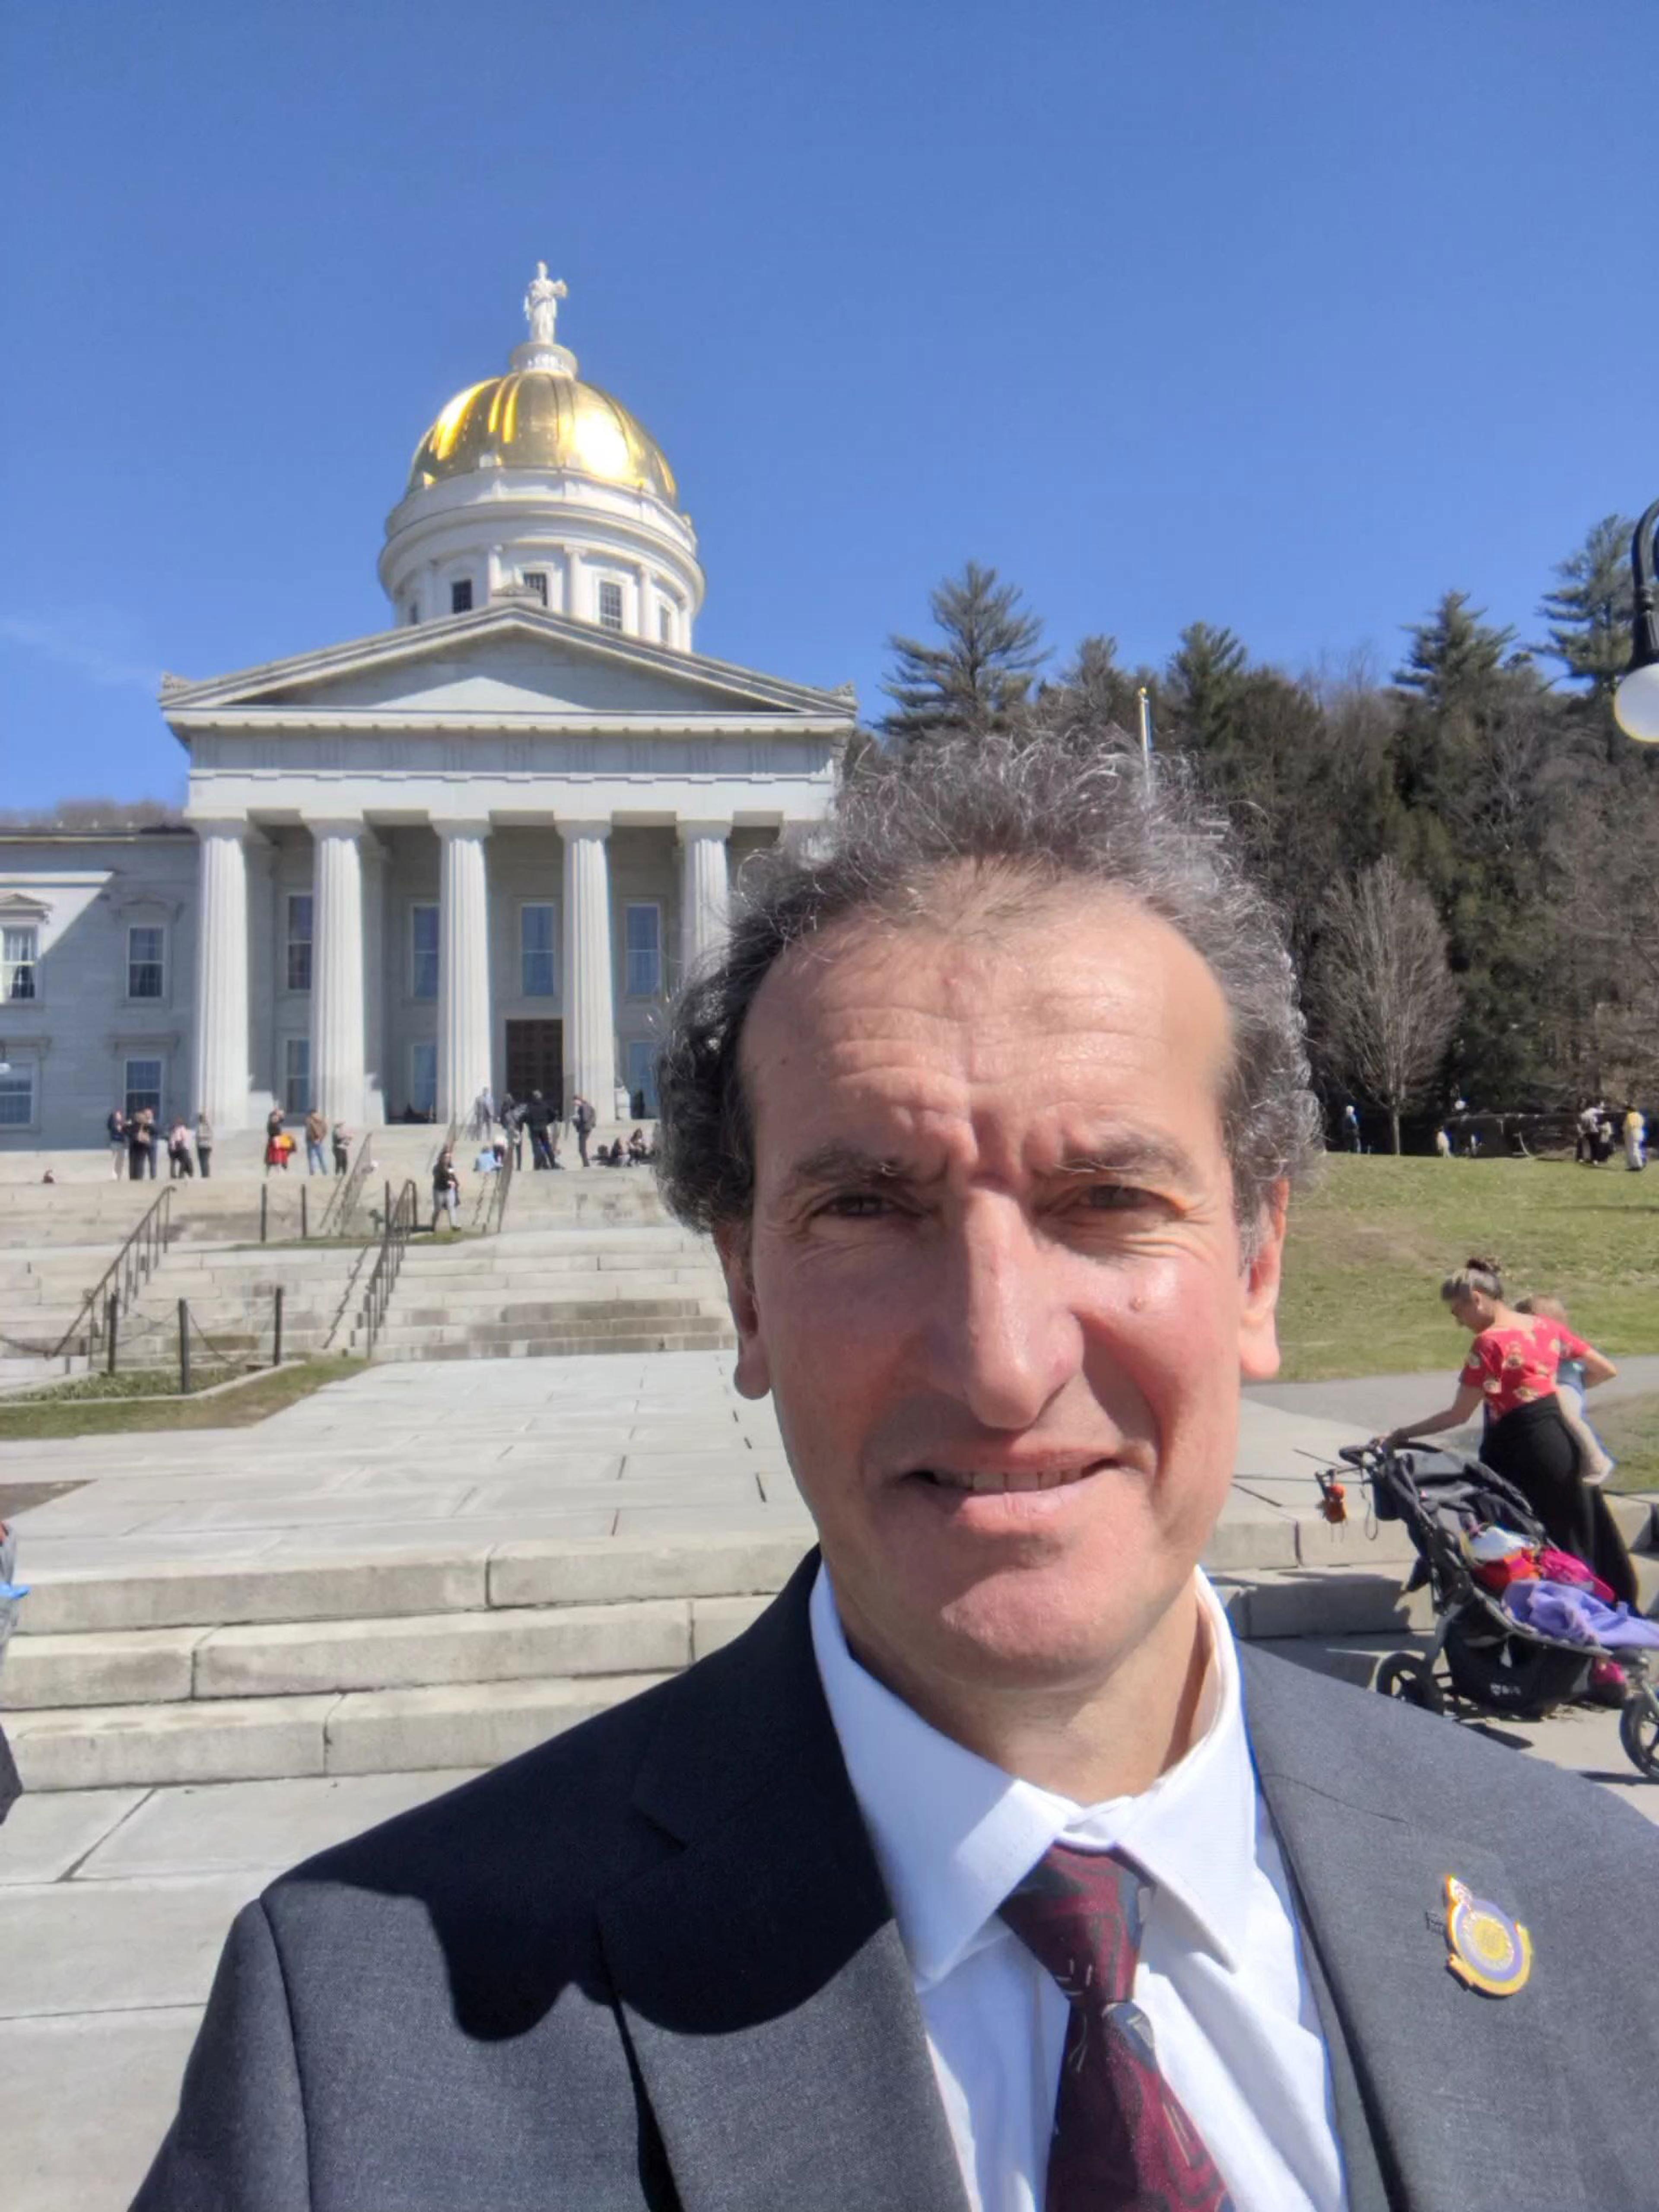 Vegan Aharonian in front of Vermont's state capital